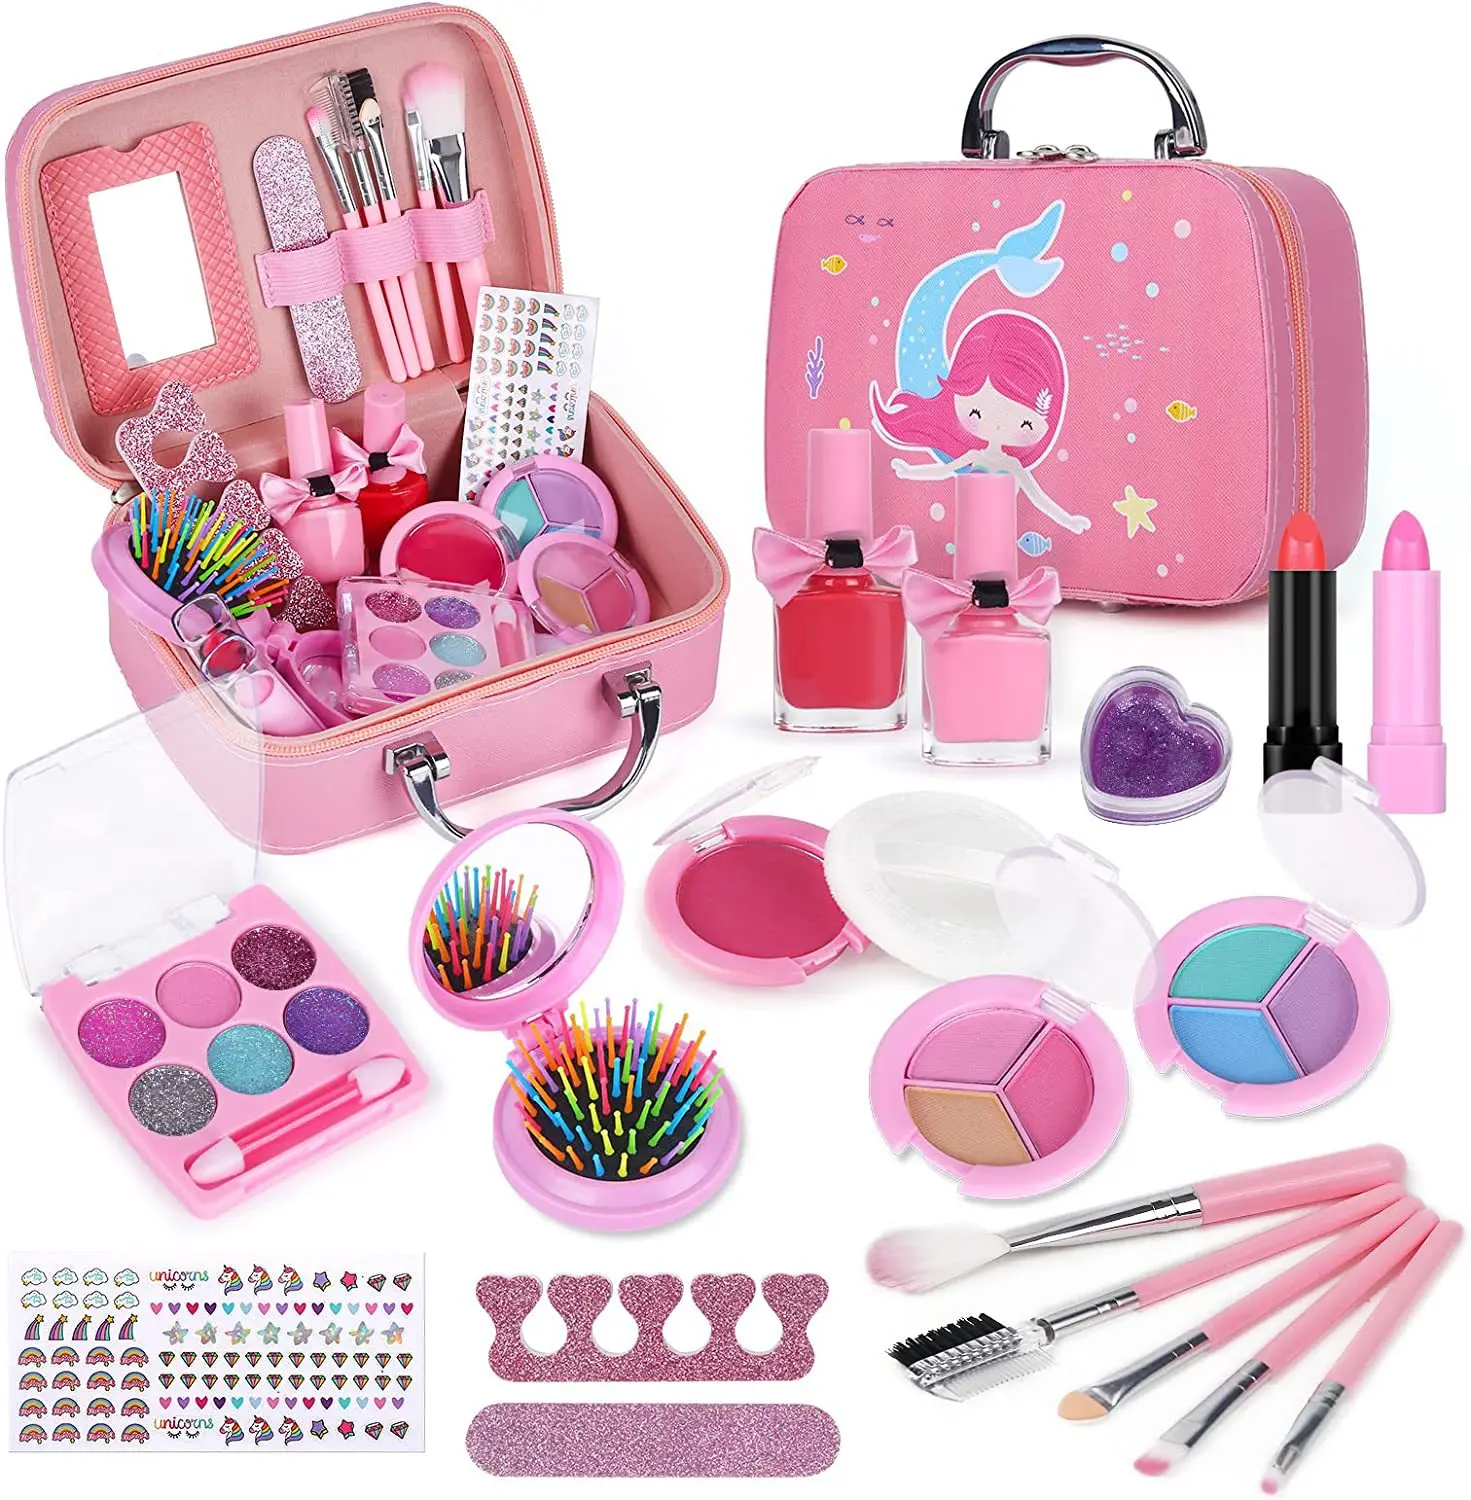 Soli Kids Makeup Kit For Girl Real Make Up Set Washable Makeup Toy For Toddler Safe & No Toxic Play Cosmetic For Children